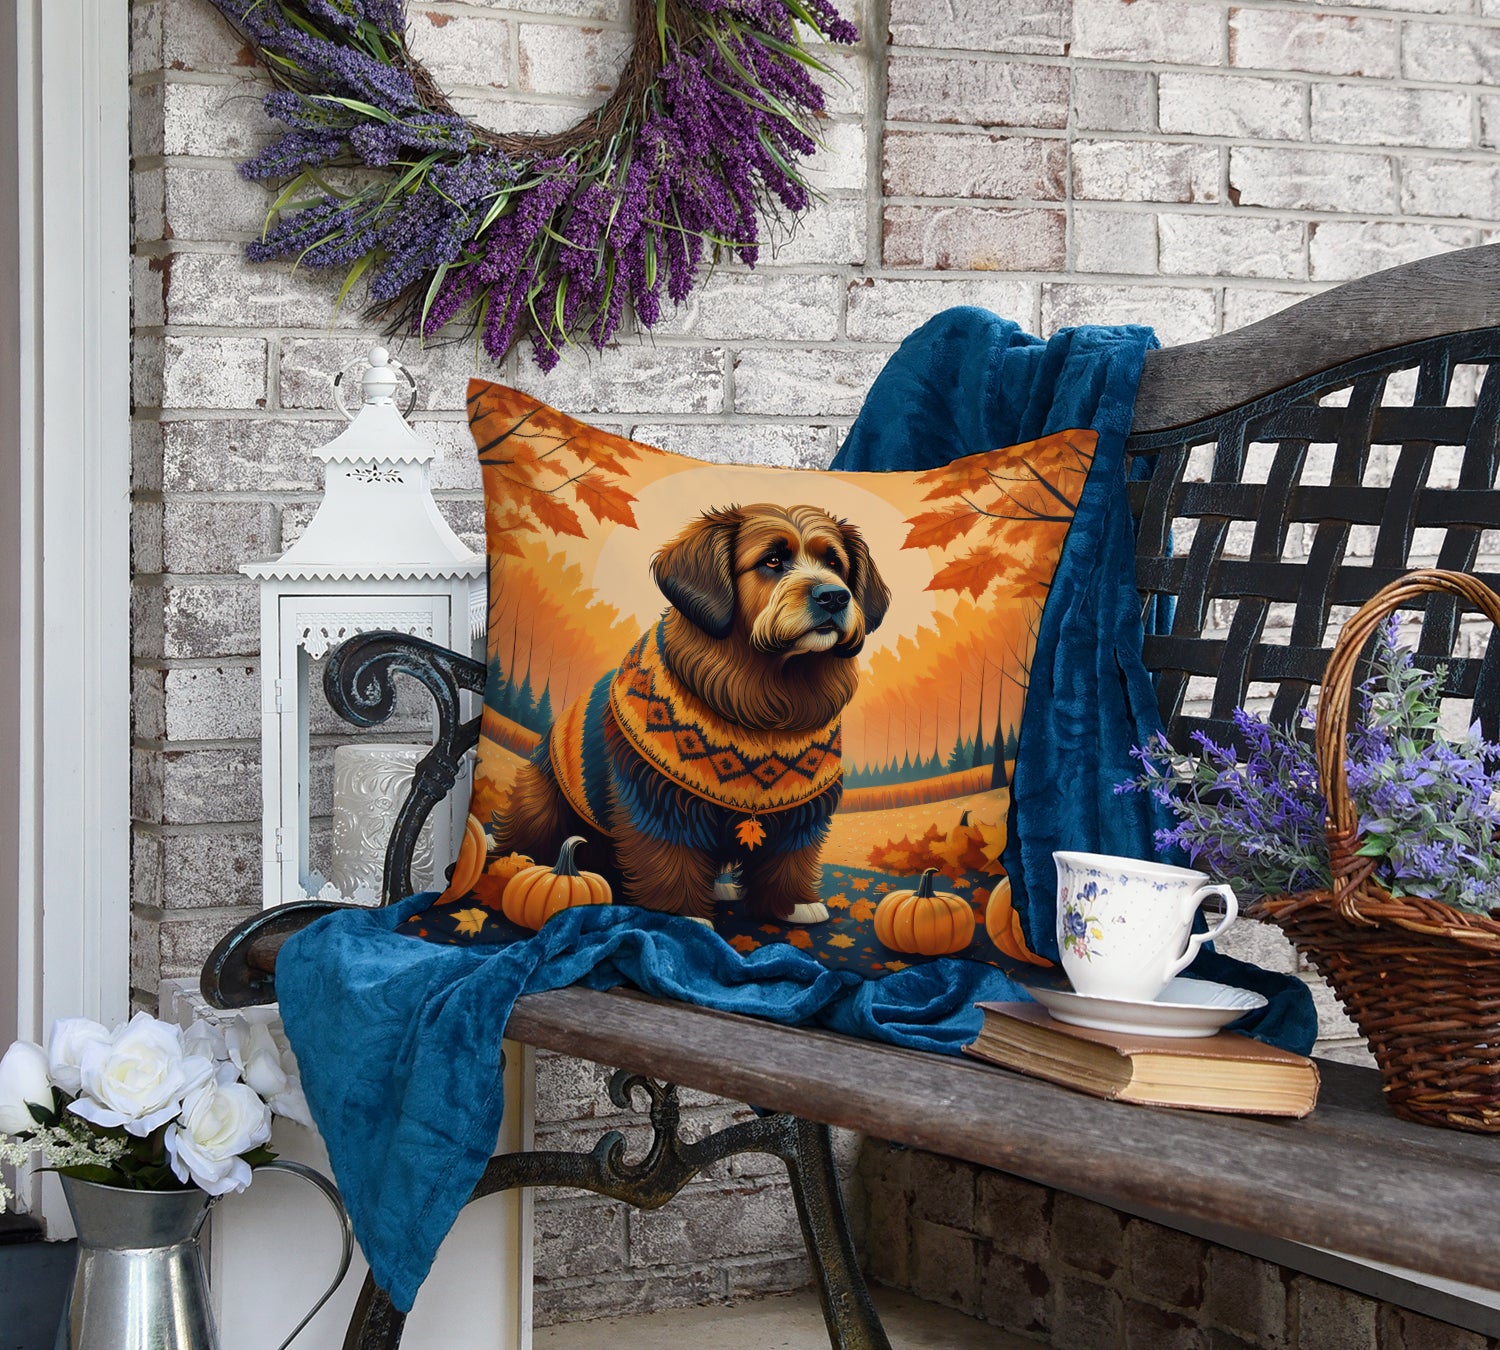 Buy this Briard Fall Fabric Decorative Pillow